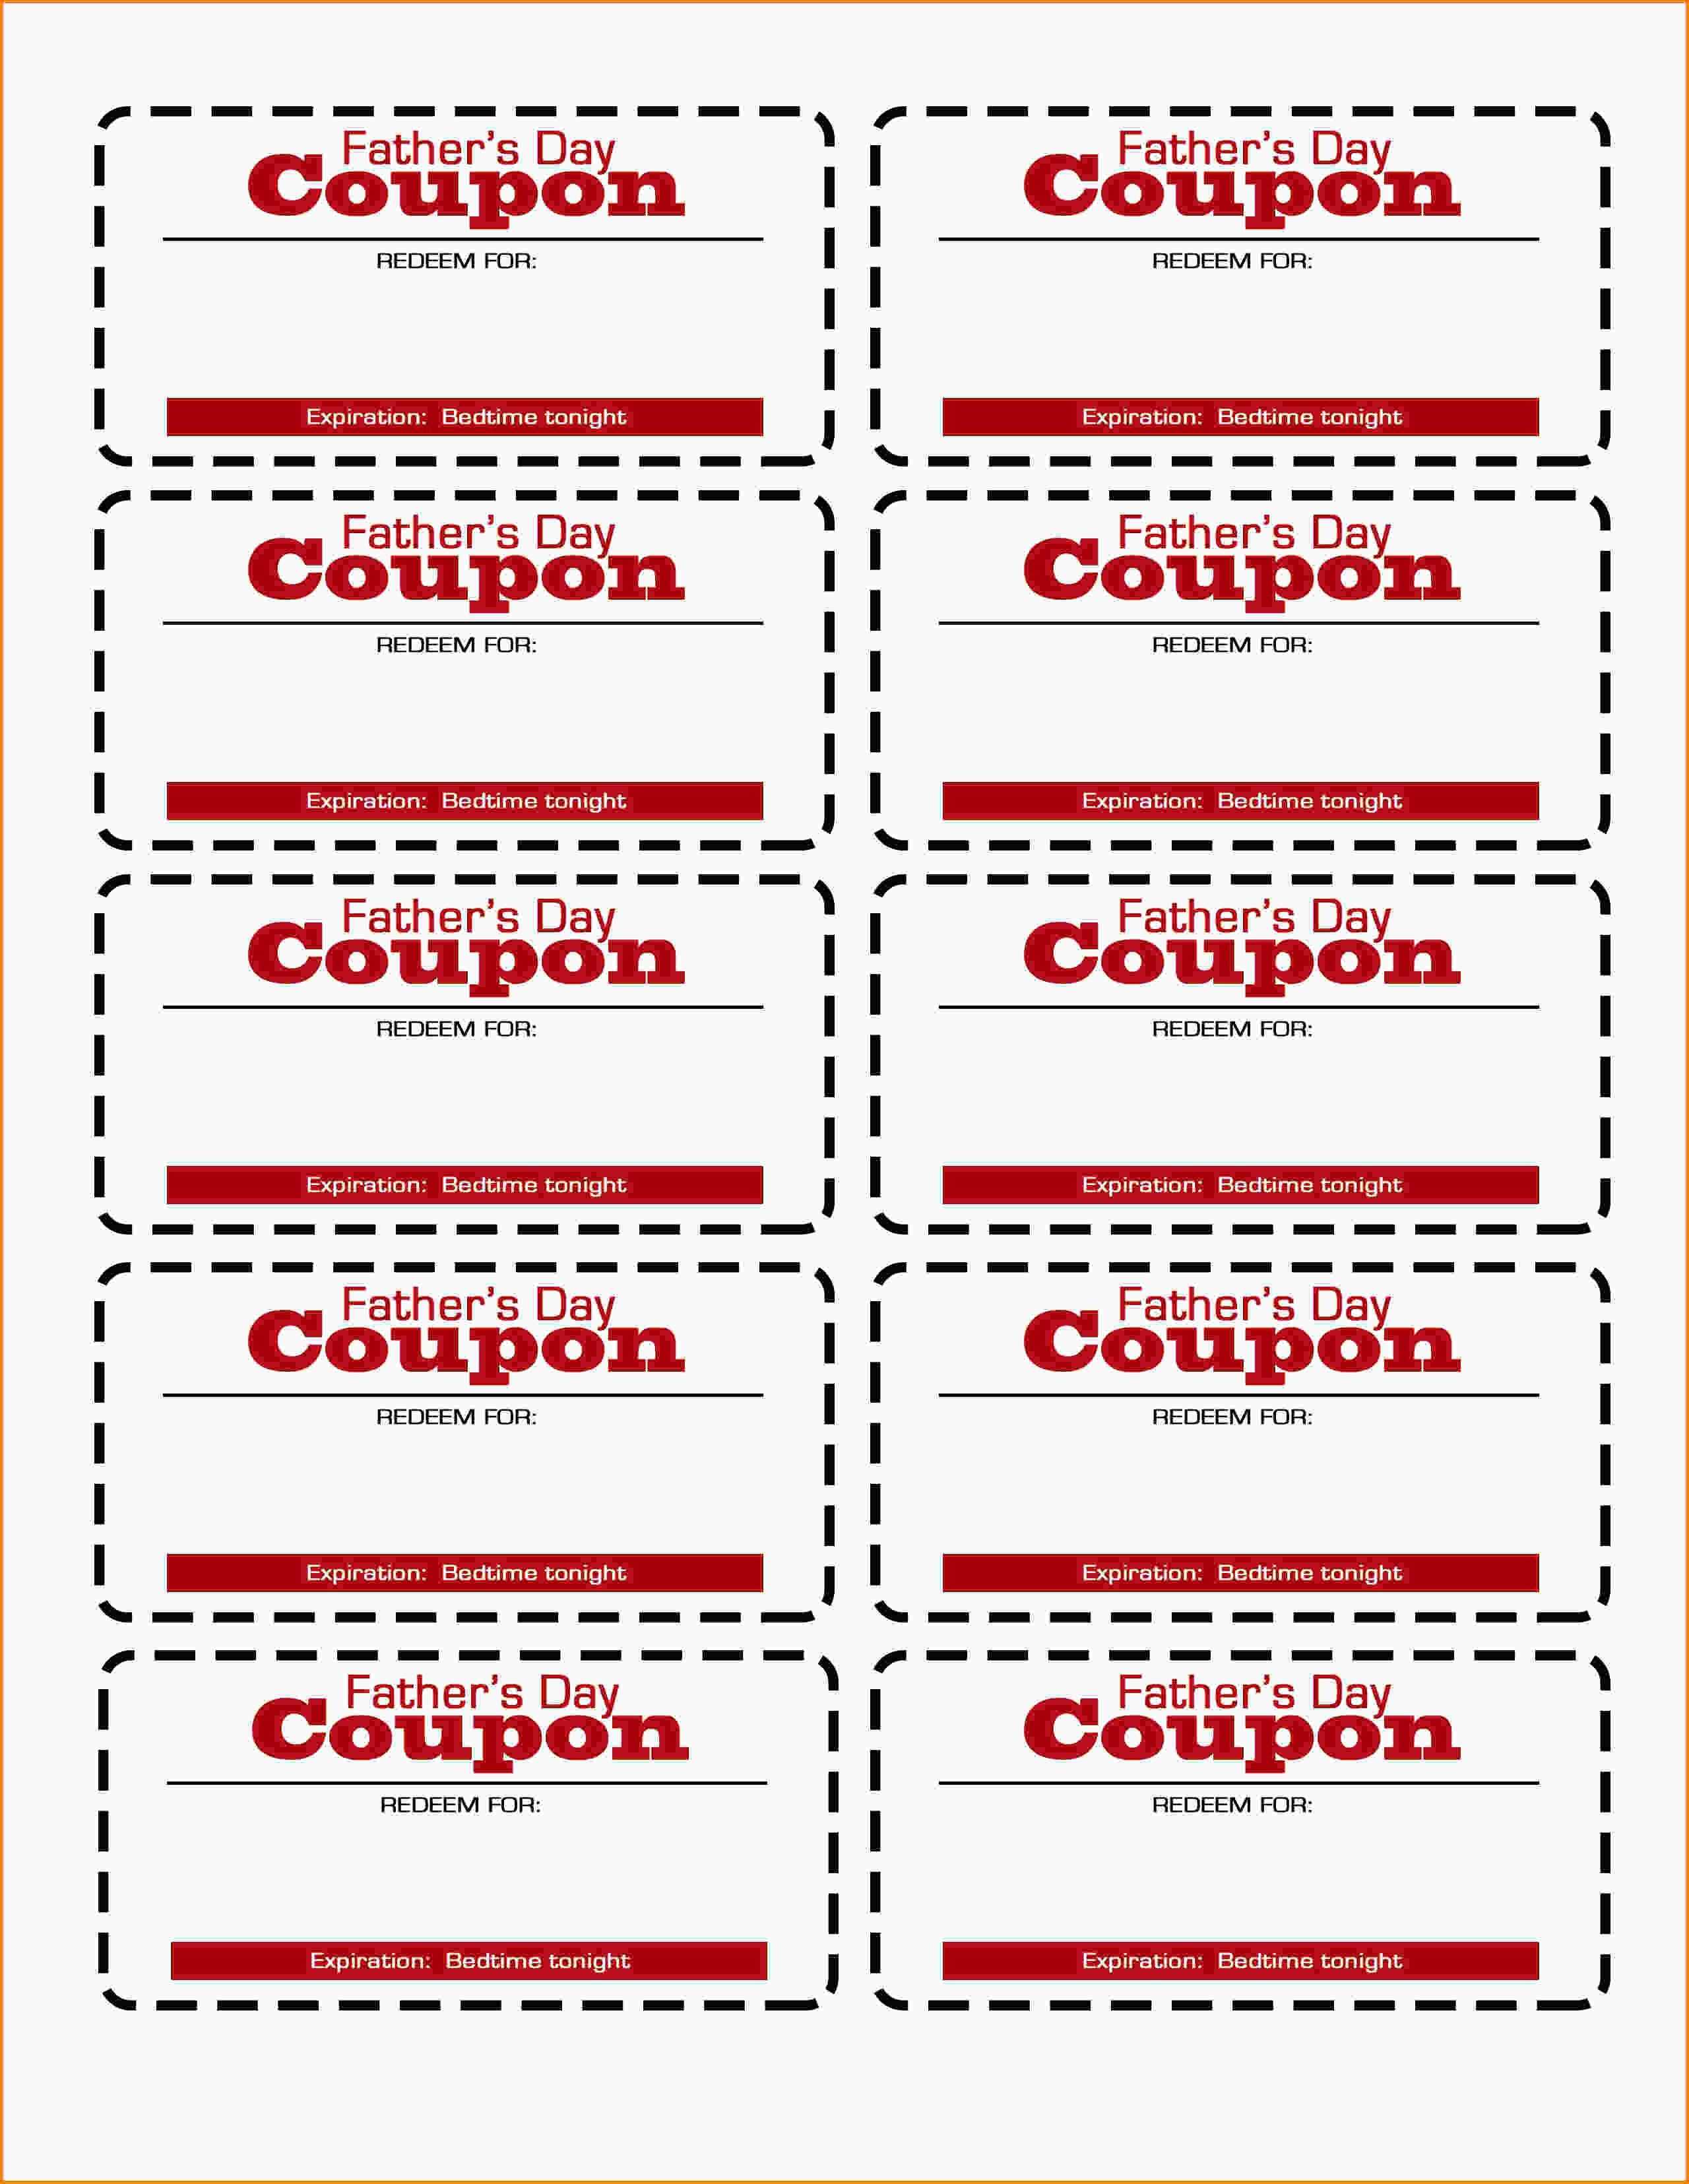 Father's Day Coupon Printable! | Flourish | Free Resources With Blank Coupon Template Printable